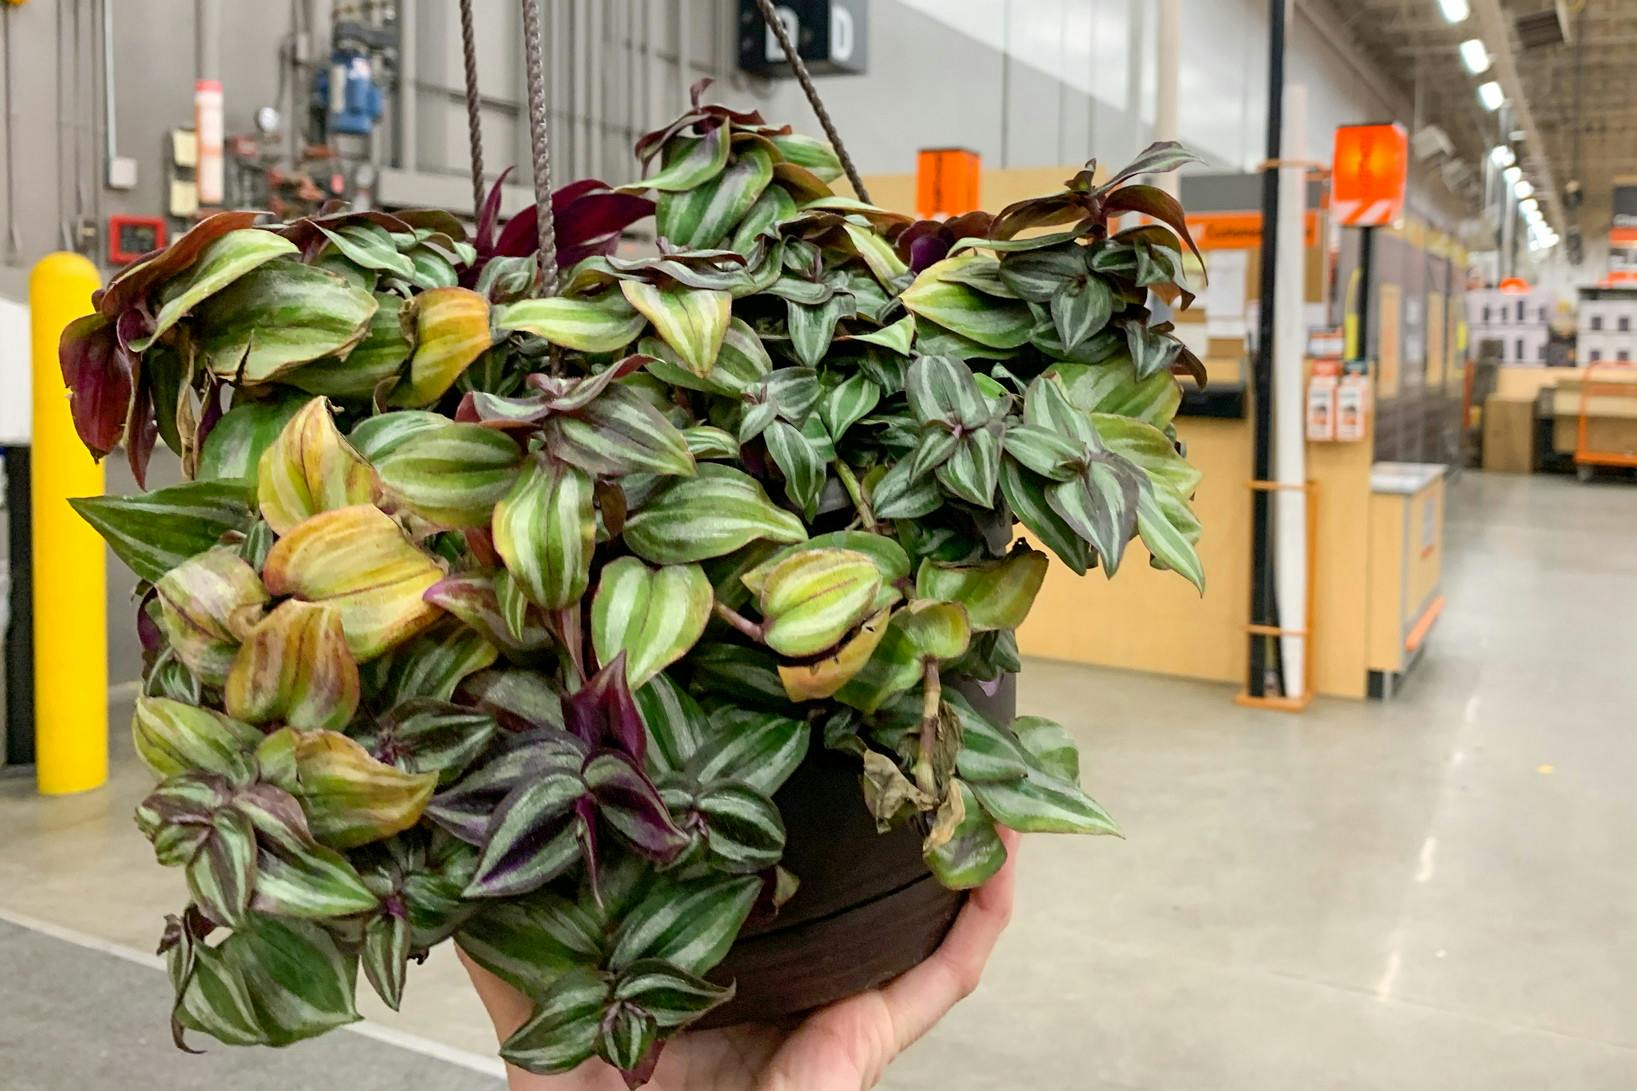 Returning dying plants to Home Depot